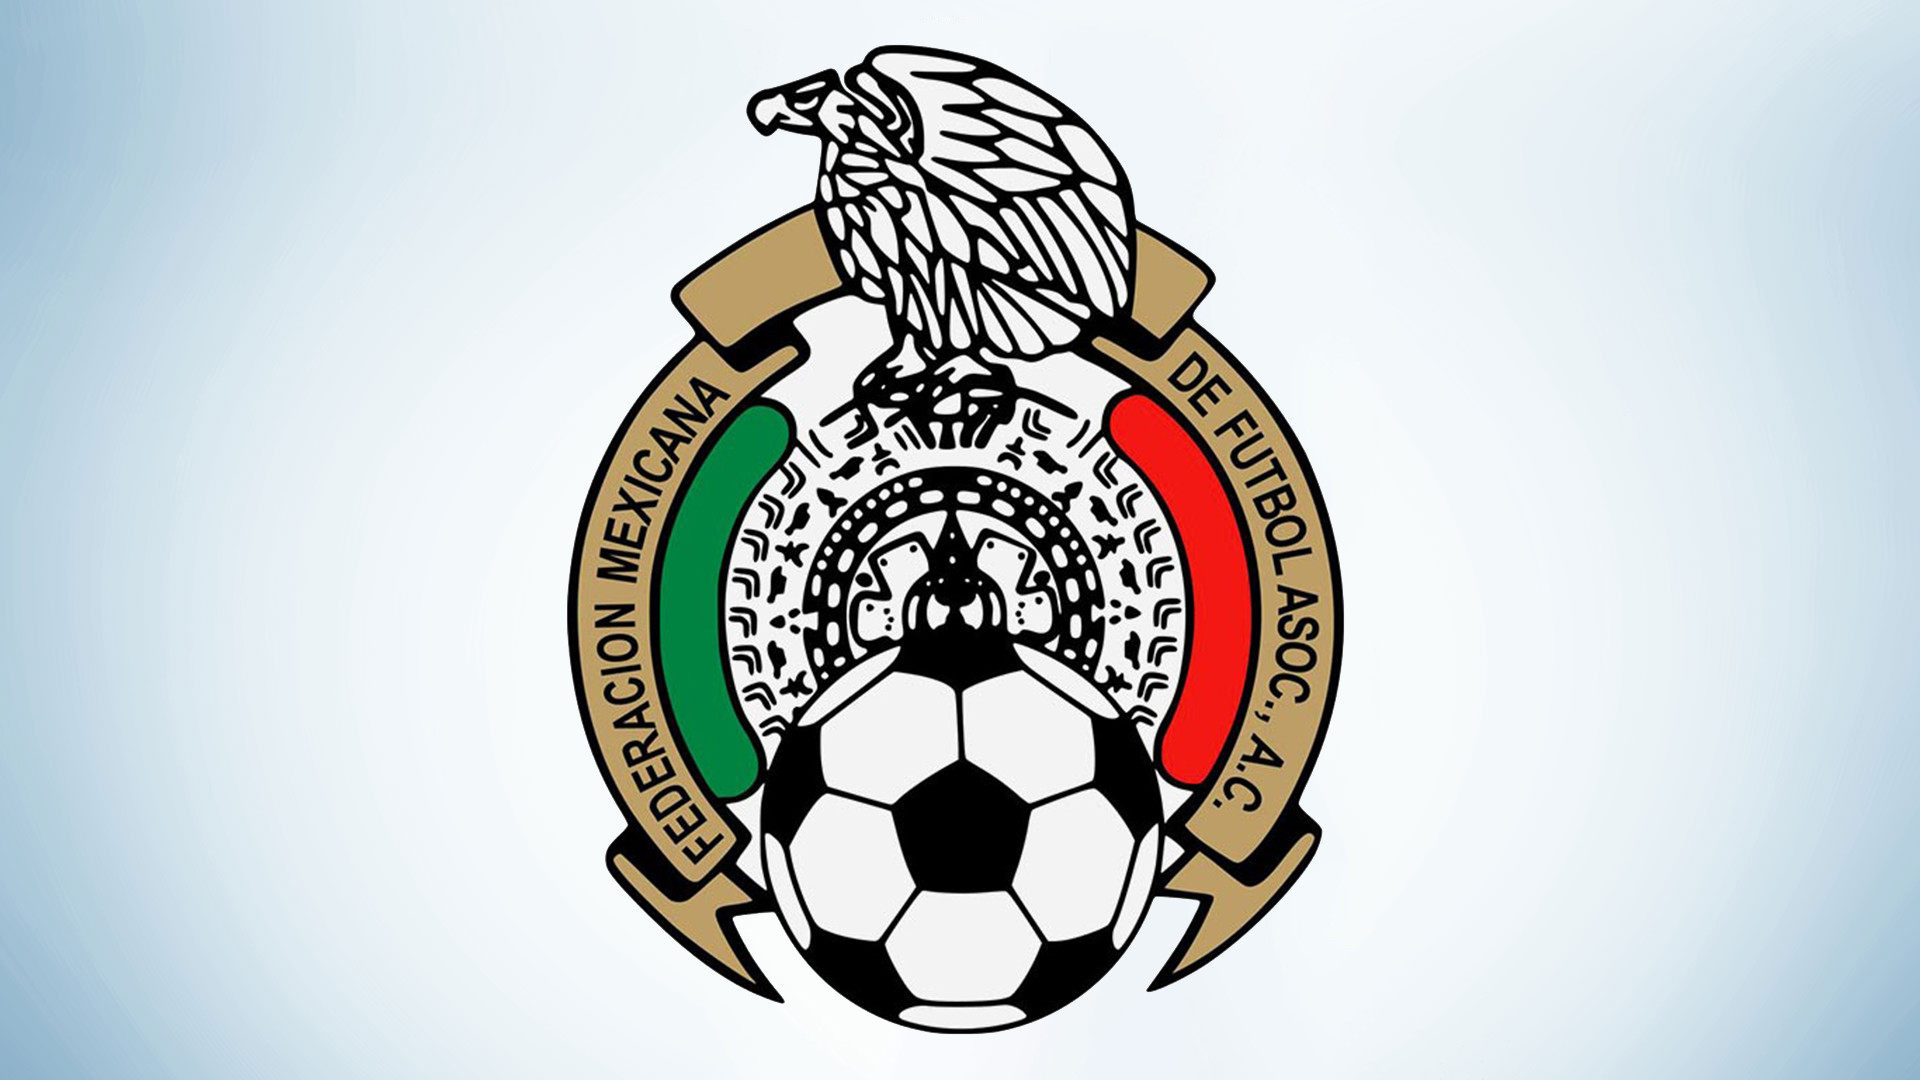 Mexico Futbol 2018 Wallpapers (84+ images)1920 x 1080